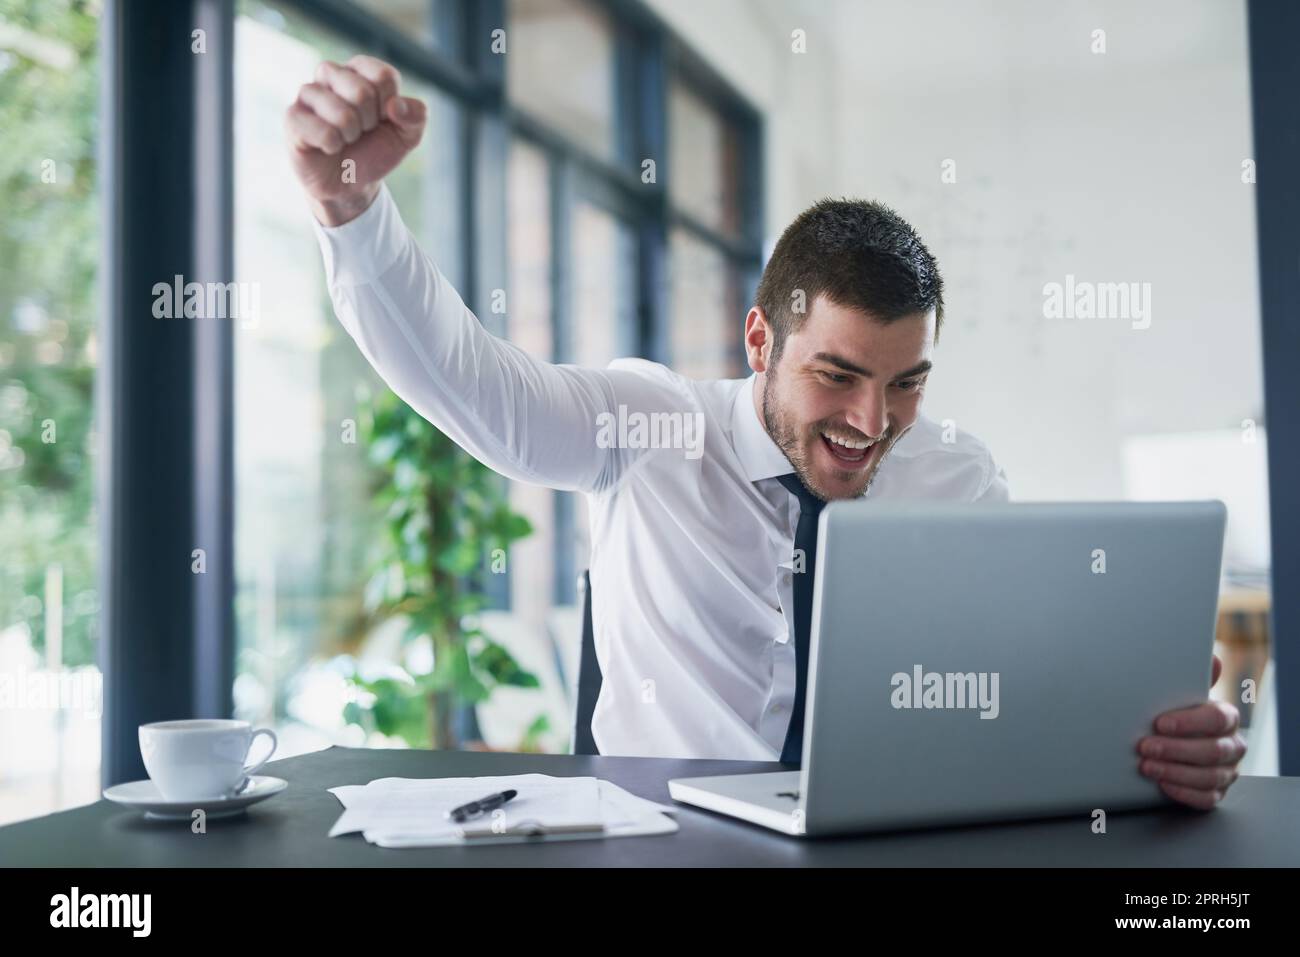 Winning in business. a young businessman cheering while working on a laptop in an office. Stock Photo